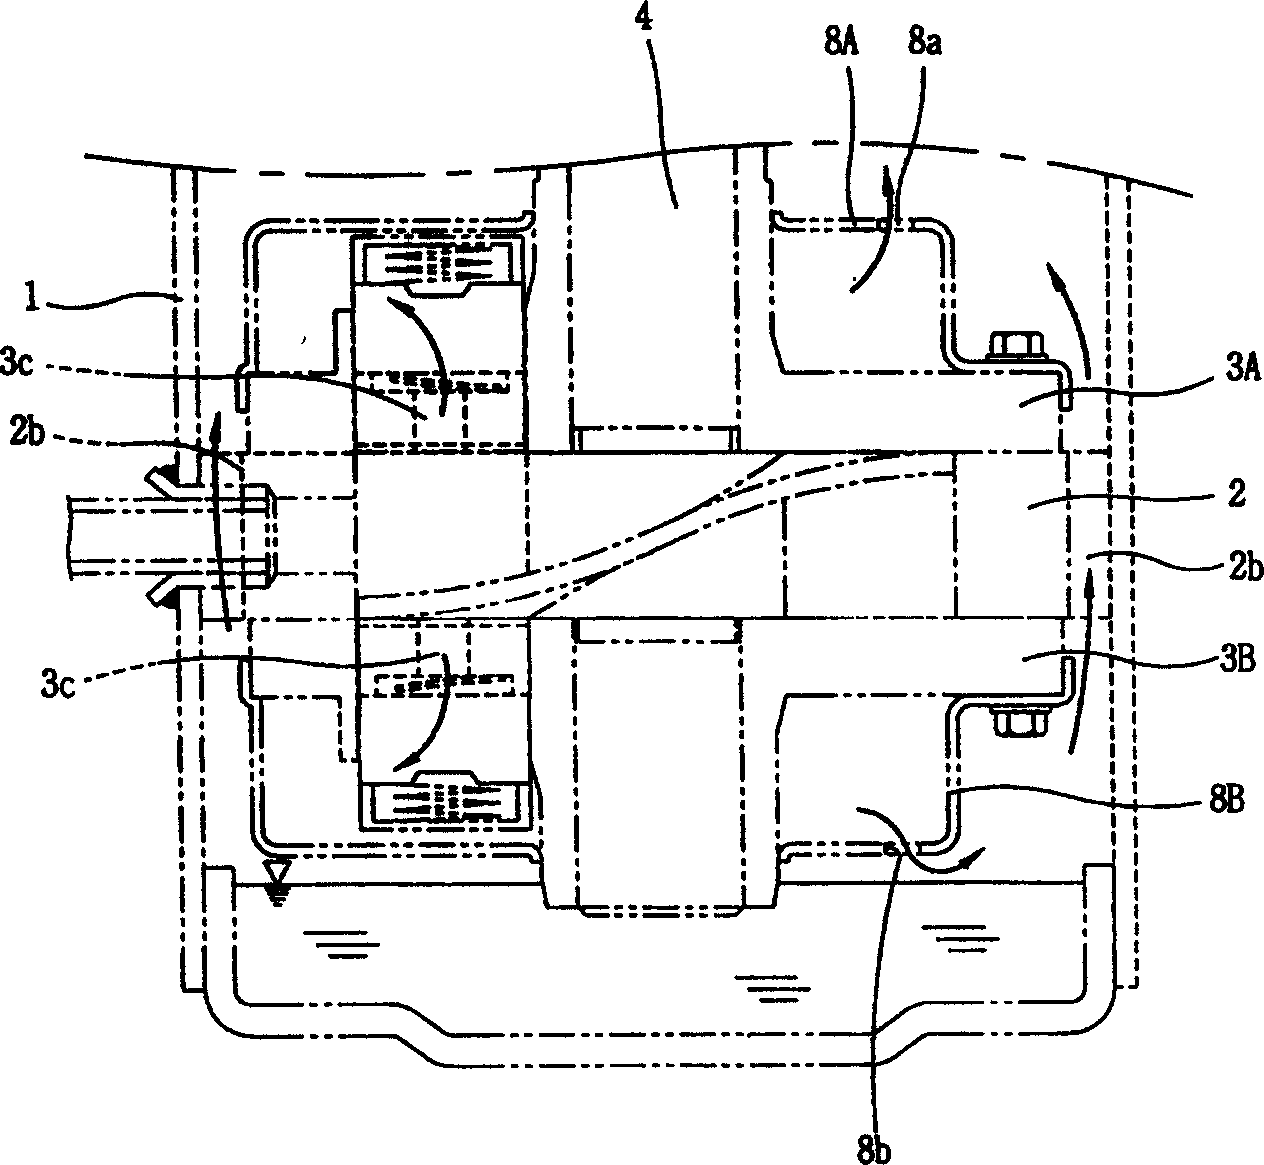 Exhaust gas quide structure of closed compressor